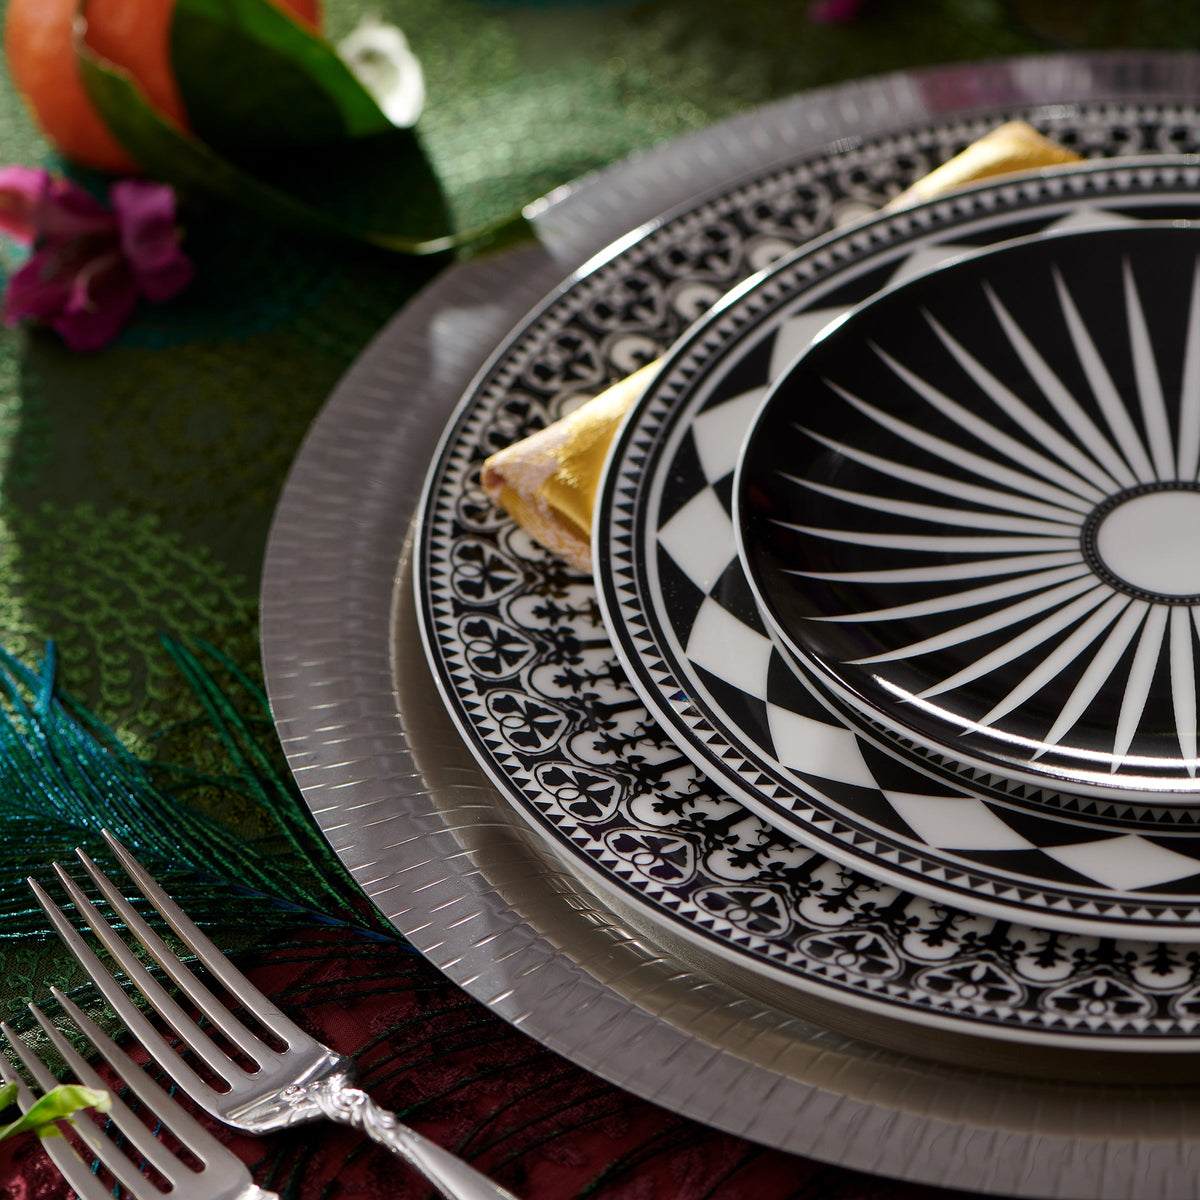 A close-up of a dining table setting with intricately patterned black and white high-fired Caskata Artisanal Home Marrakech Small Plates stacked on a silver charger. Two forks are placed to the left of the plate. The tablecloth, reminiscent of Marrakech with its green leaf accents, adds an exotic touch.